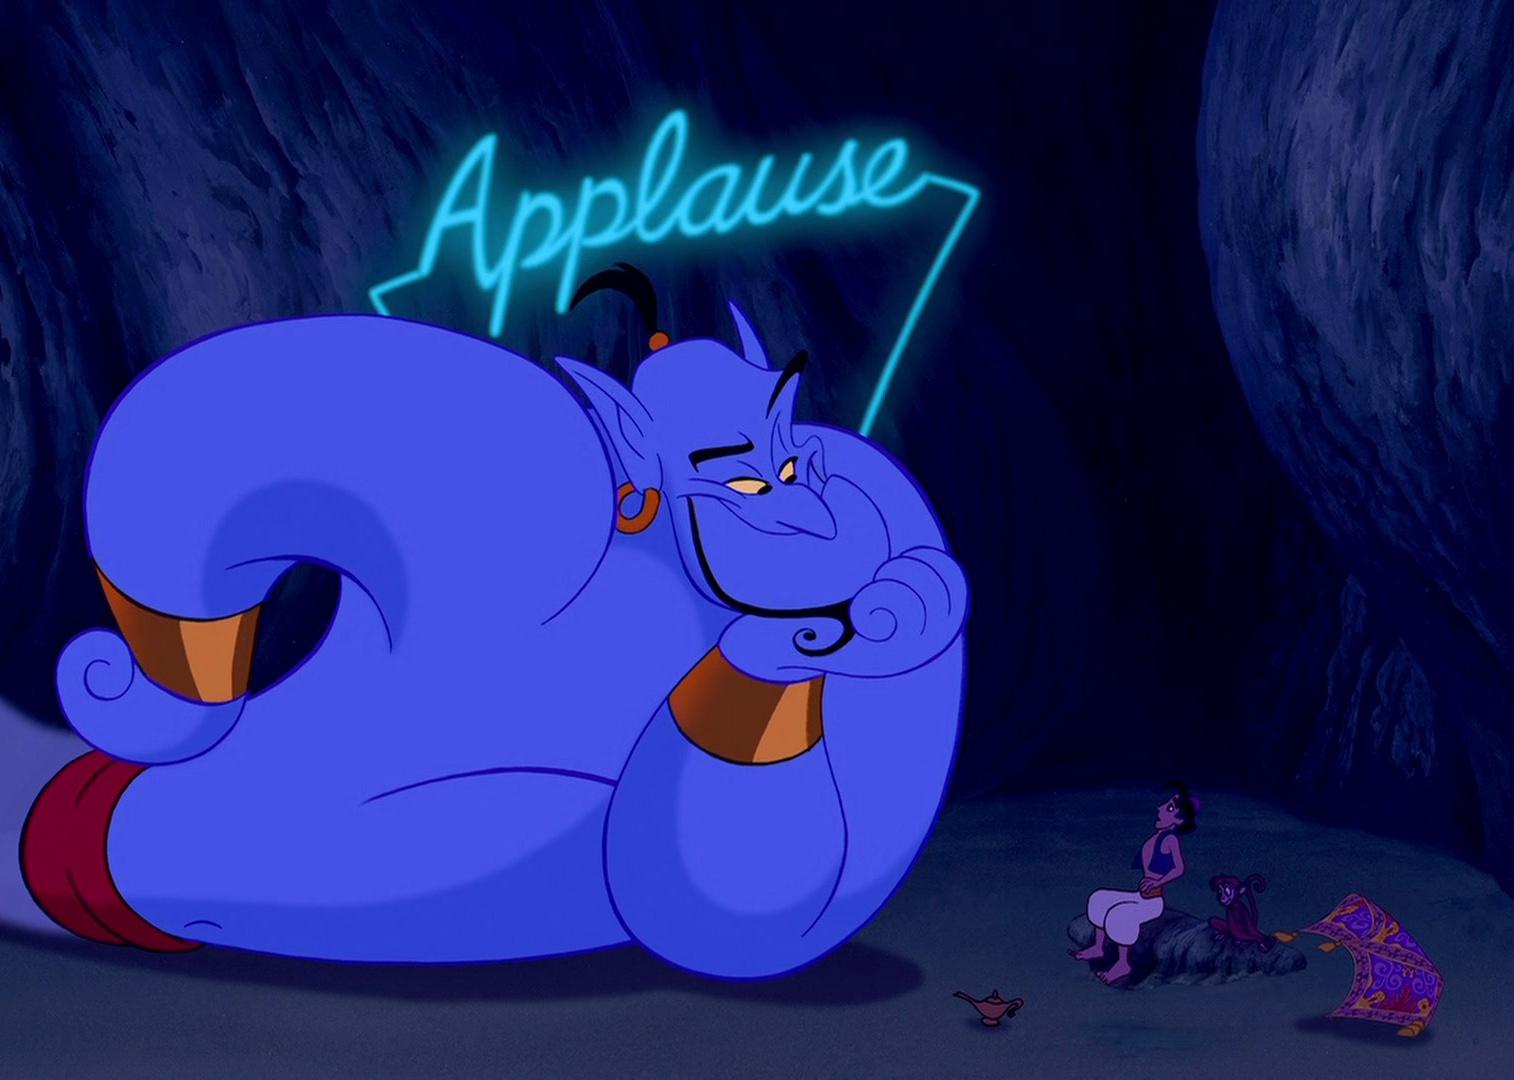 A cartoon blue genie on the floor with an applause sign above his head performing for a man, a monkey and a flying carpet.